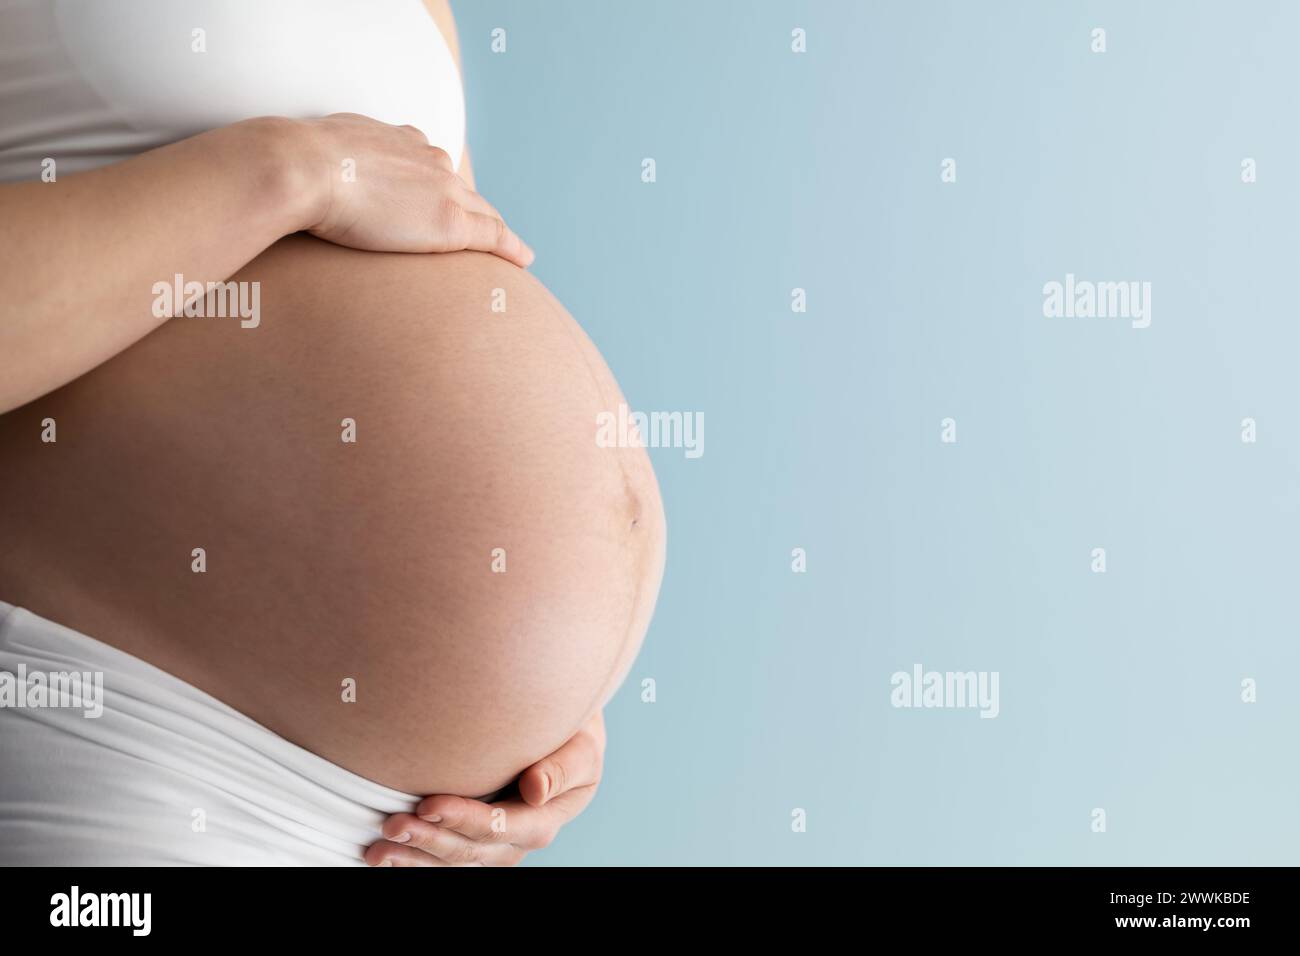 Description: Middle part of unrecognizable standing woman in white cloths gently holding her very round pregnant baby bump. Side angle  view. Blue bac Stock Photo